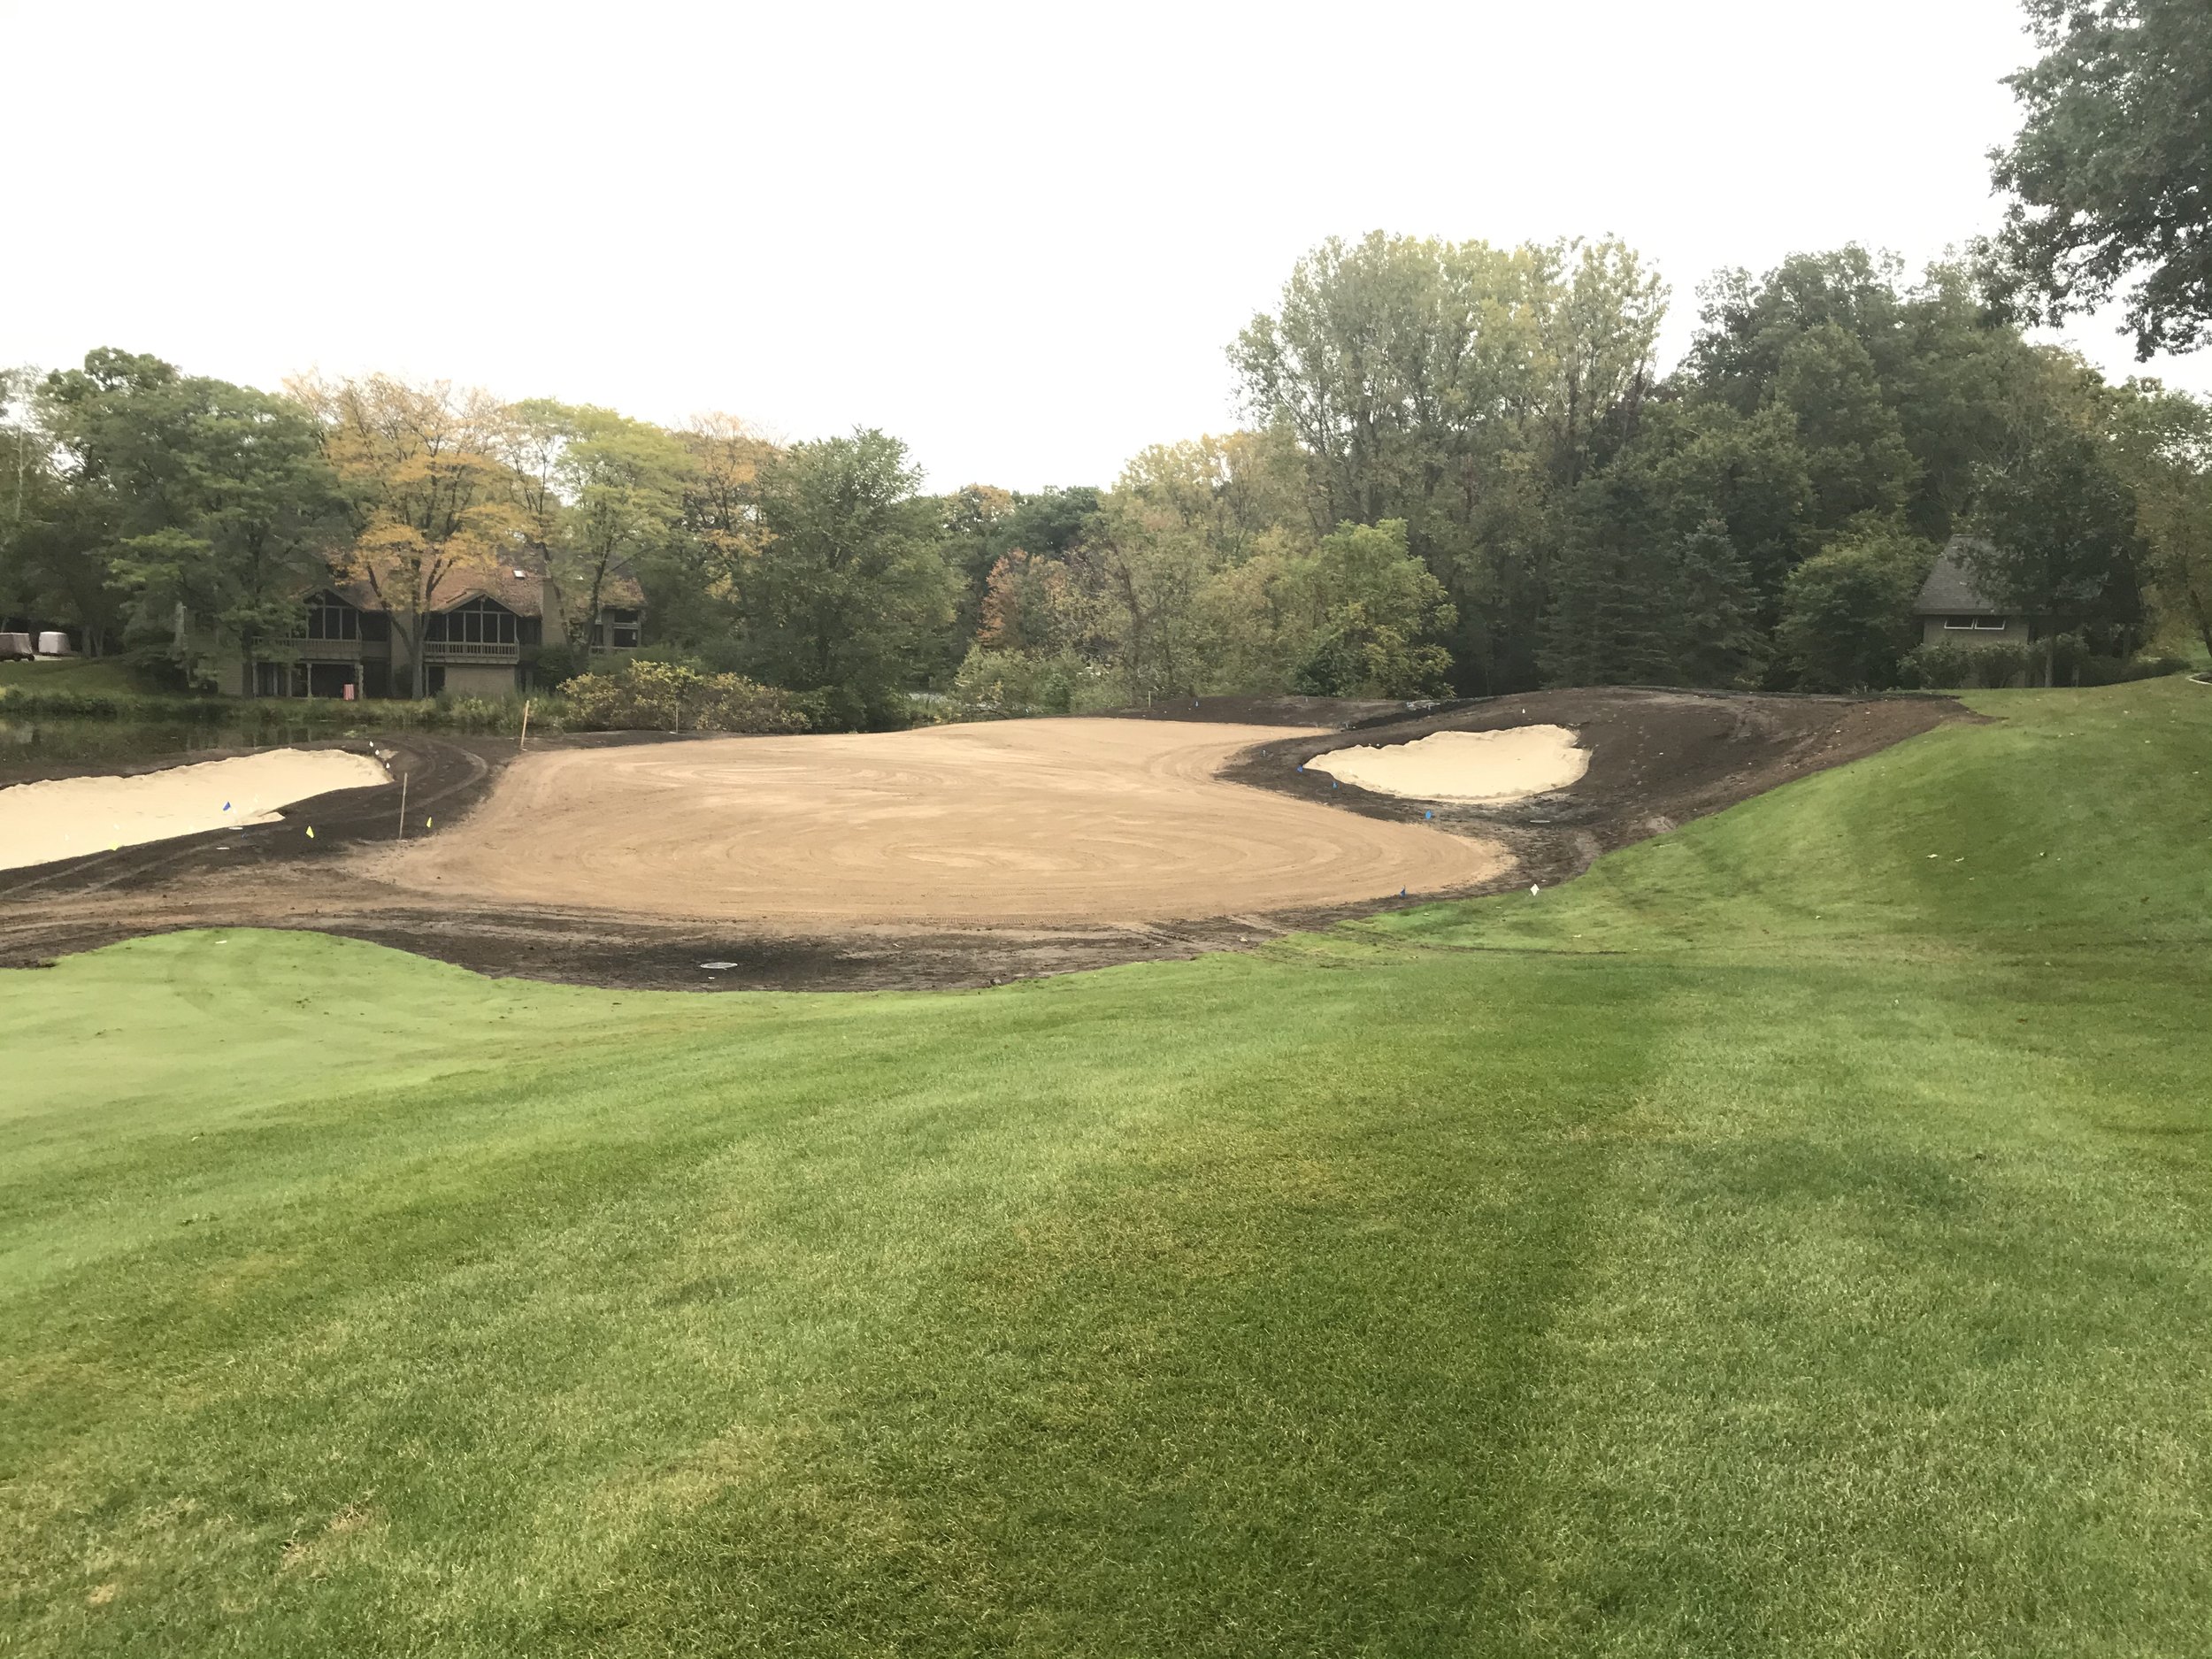 Golf course repairs, before